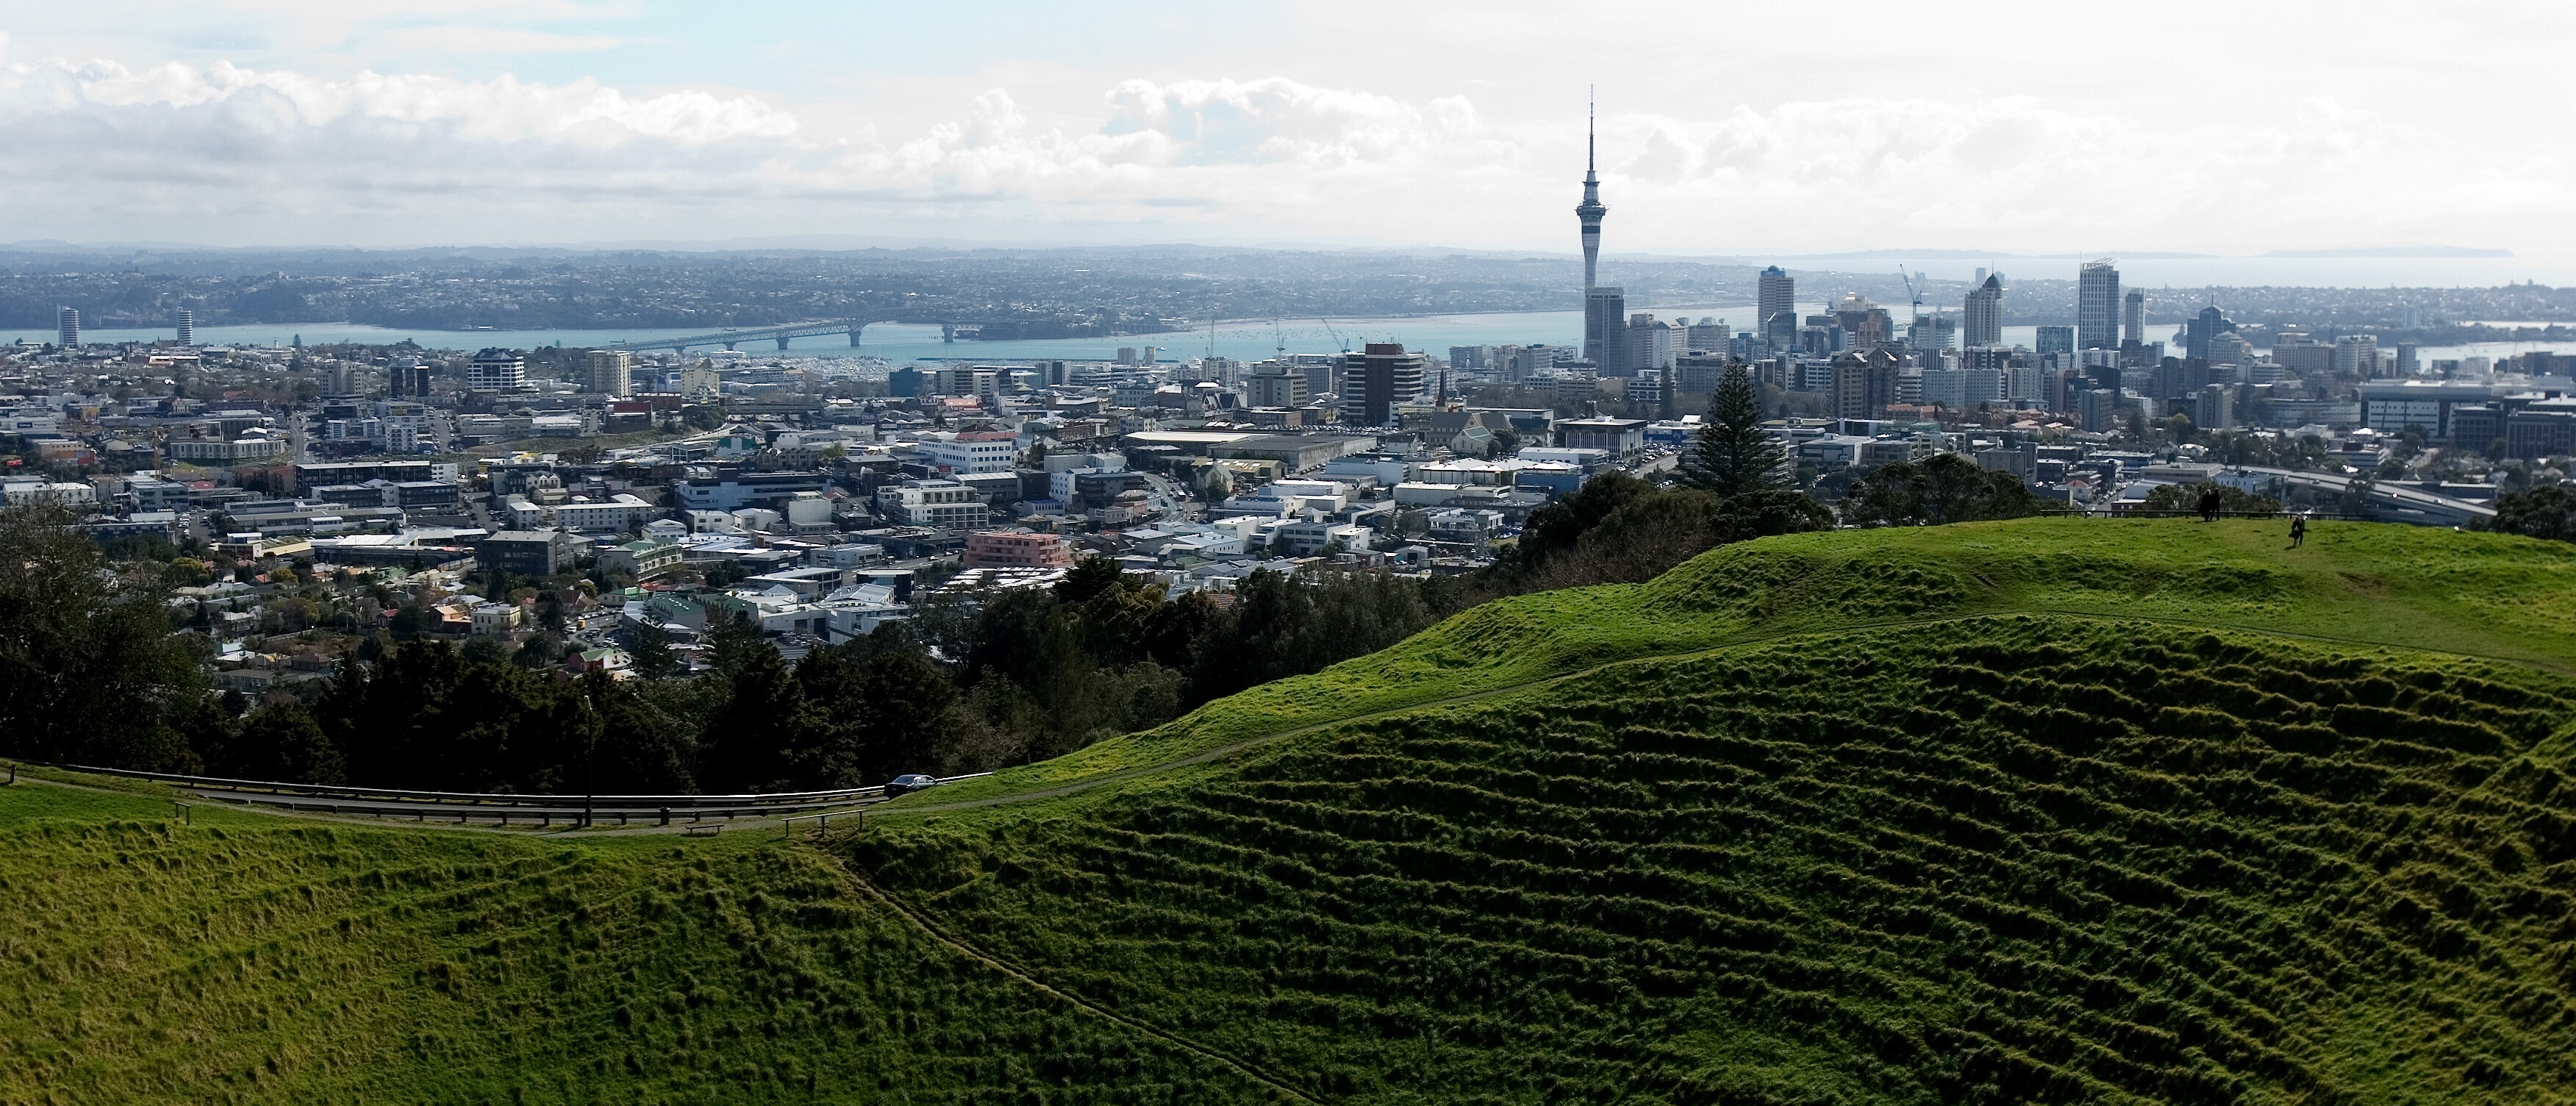 New Zealand is reopening for business, PM Jacinda Ardern says. Photo: NZ Herald